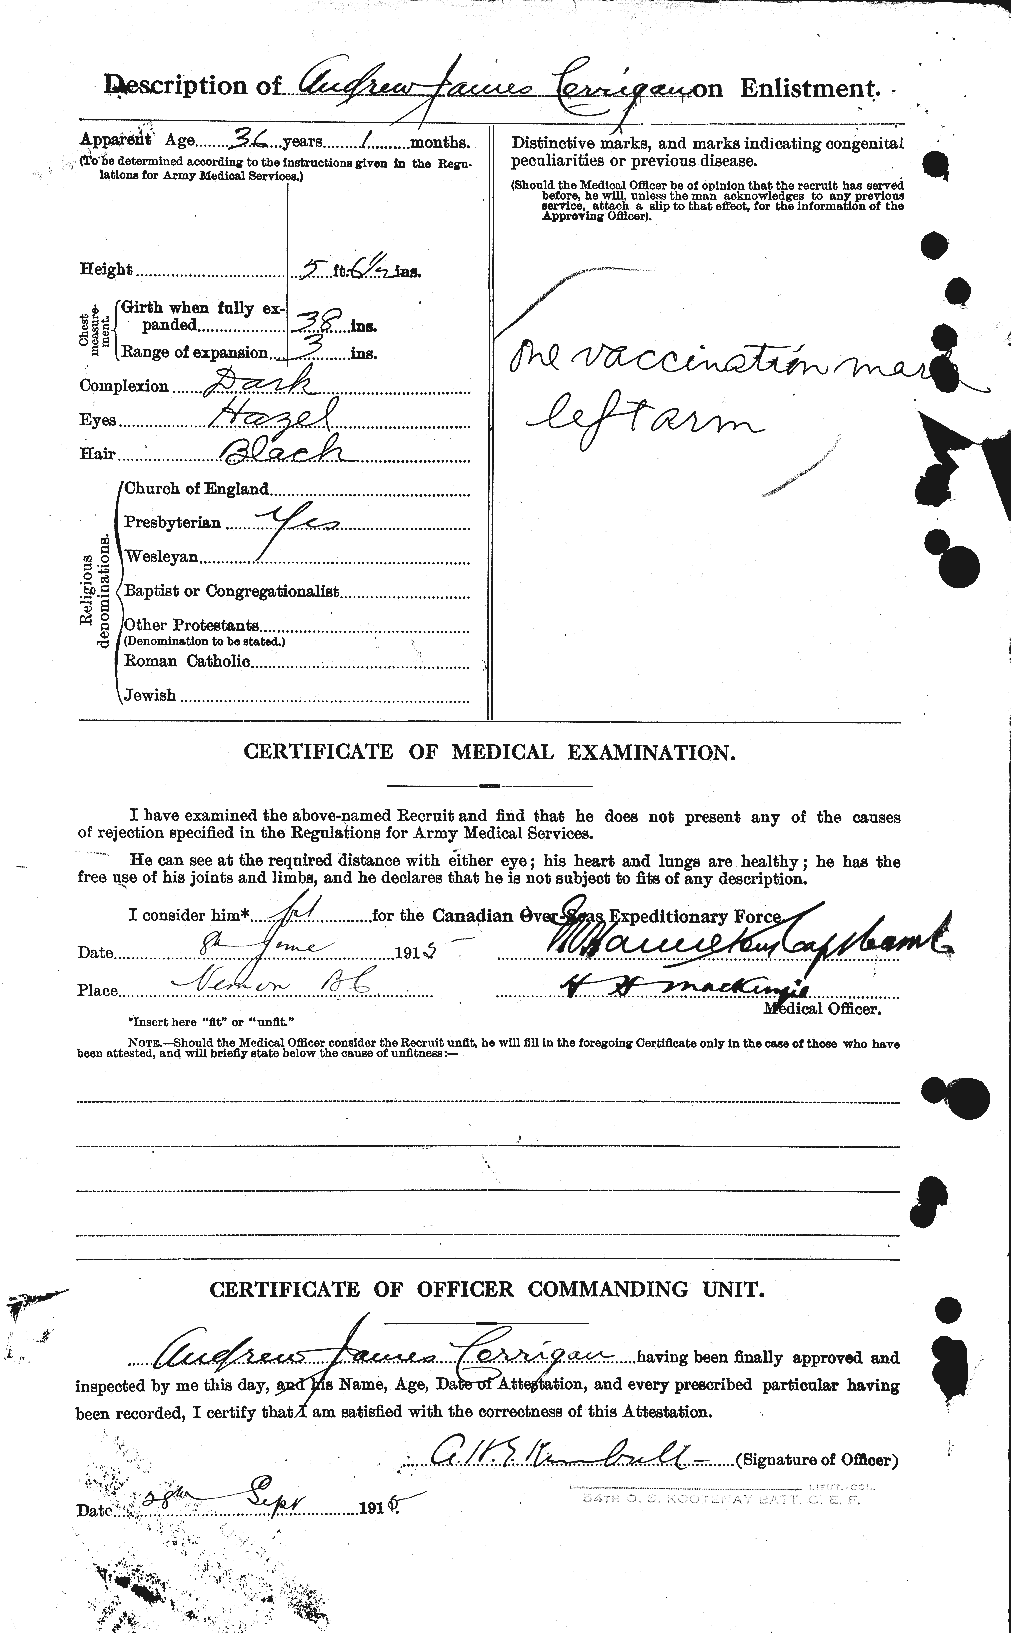 Personnel Records of the First World War - CEF 054843b